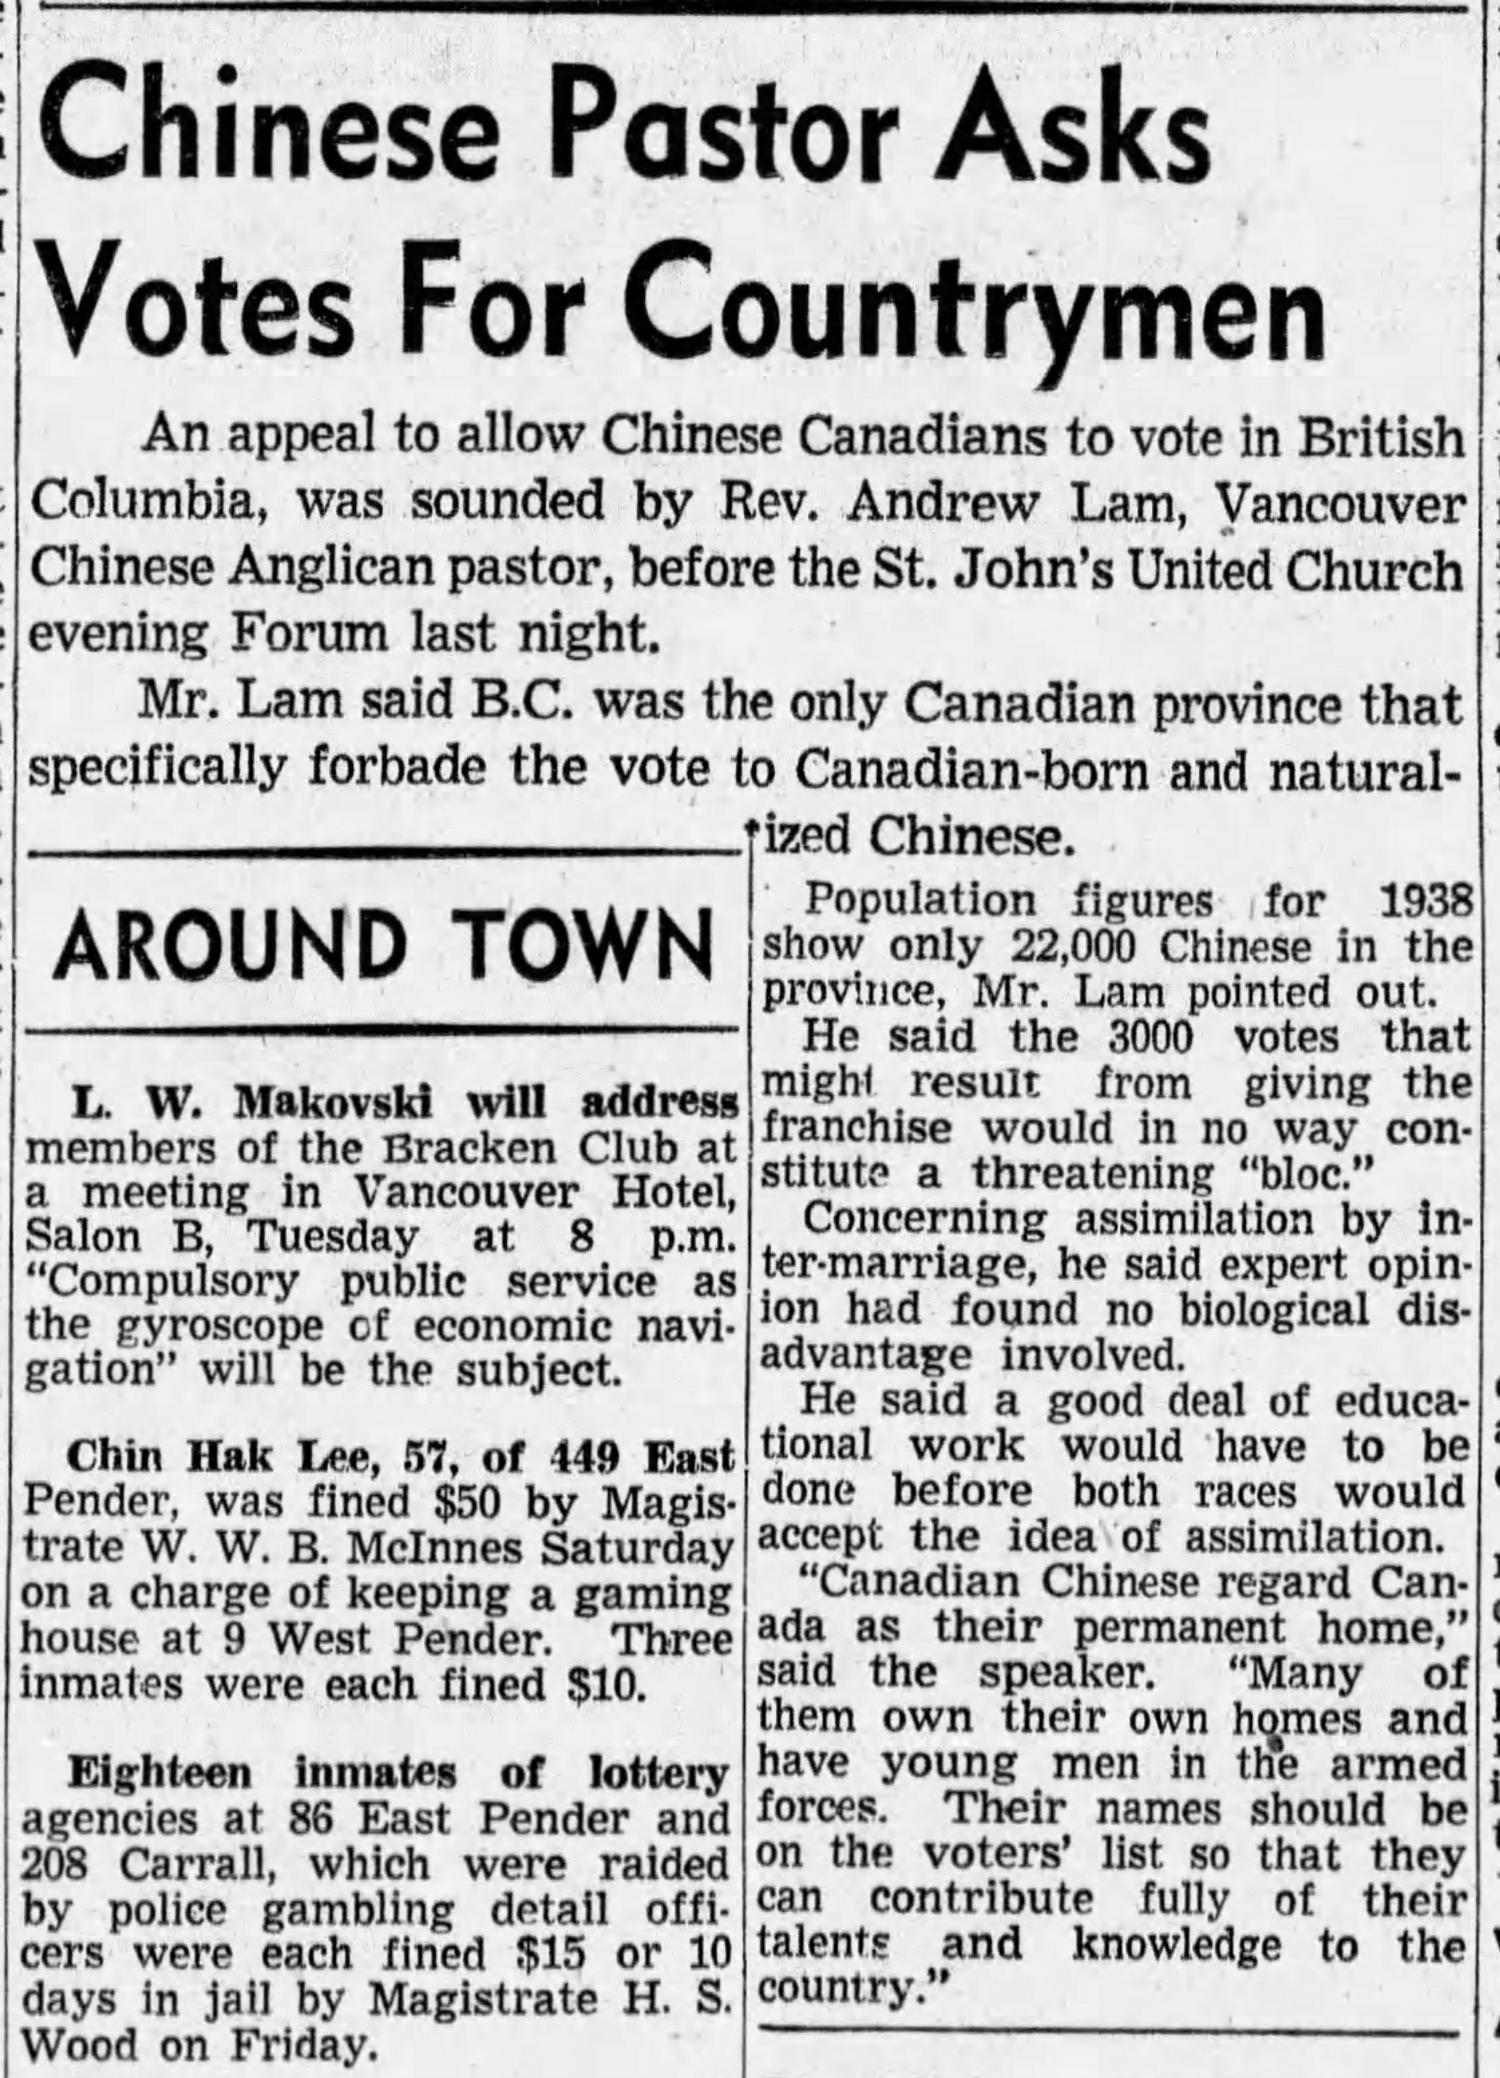 Newspaper article on Rev. Andrew Lam's campaign for Chinese-Canadian voting rights.